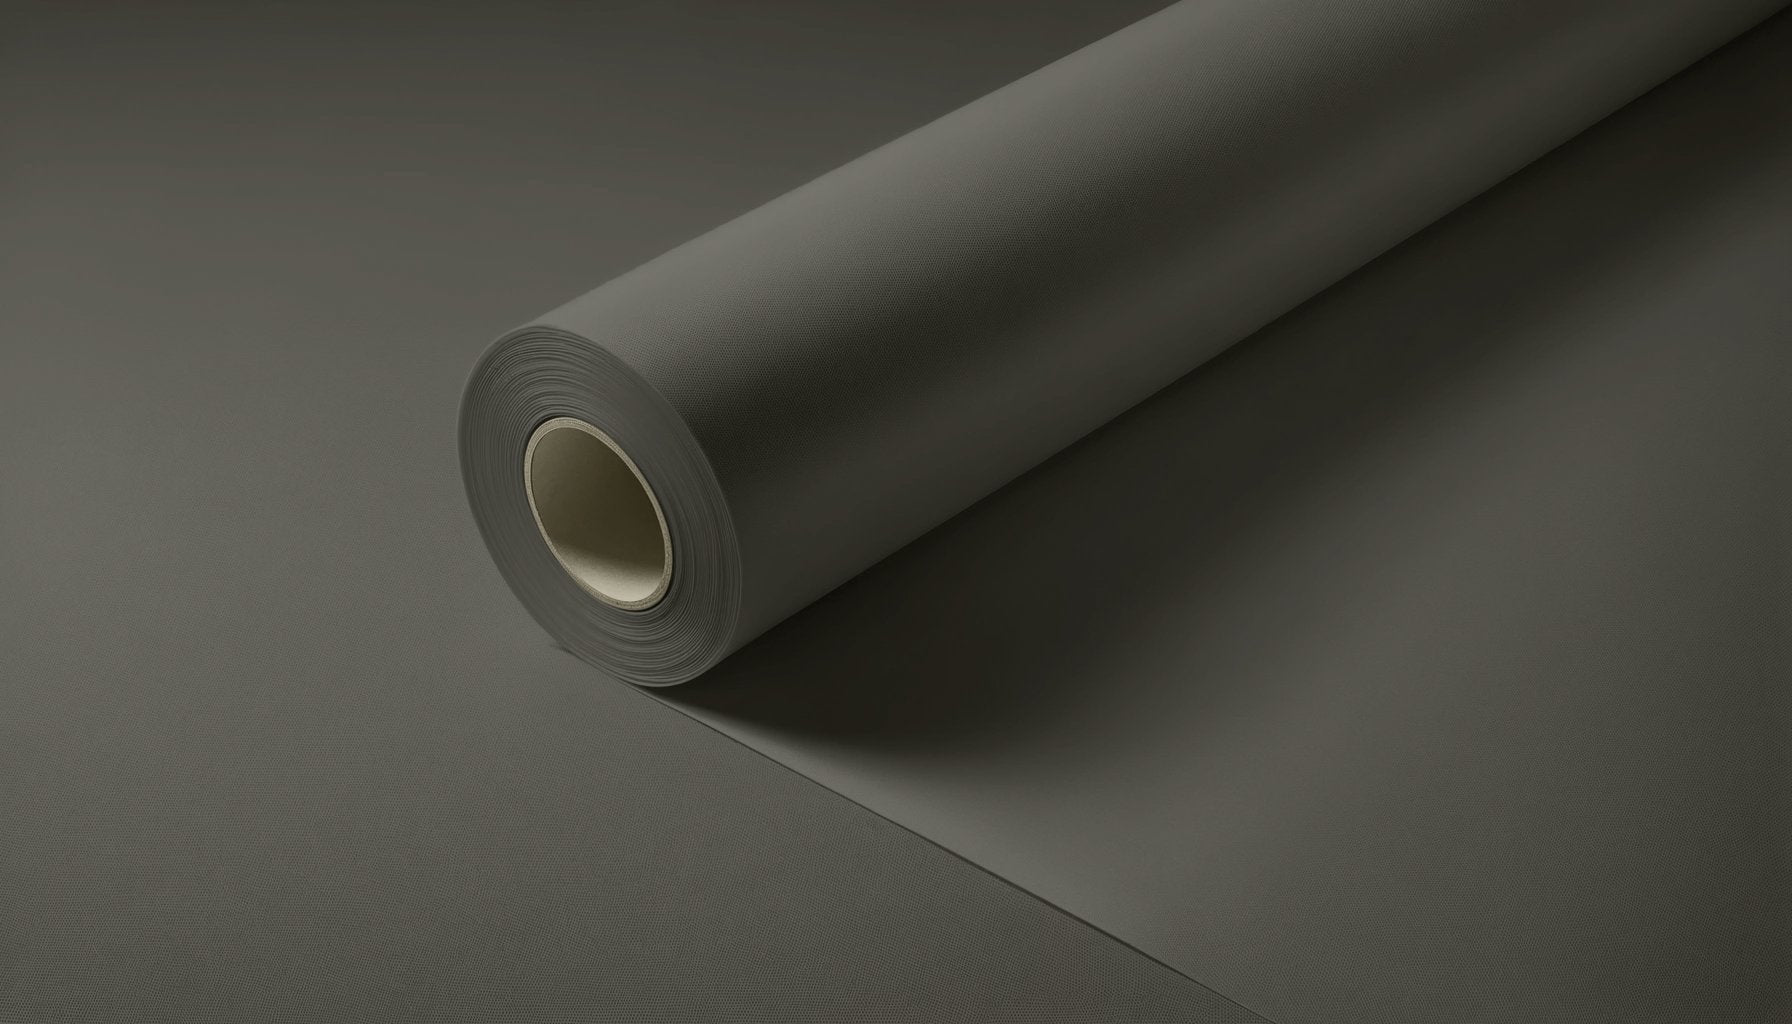 Peel & Stick Removable Re-usable Paint - Color RAL 7022 Umbra Grey - offRAL™ - RALRAW LLC, USA